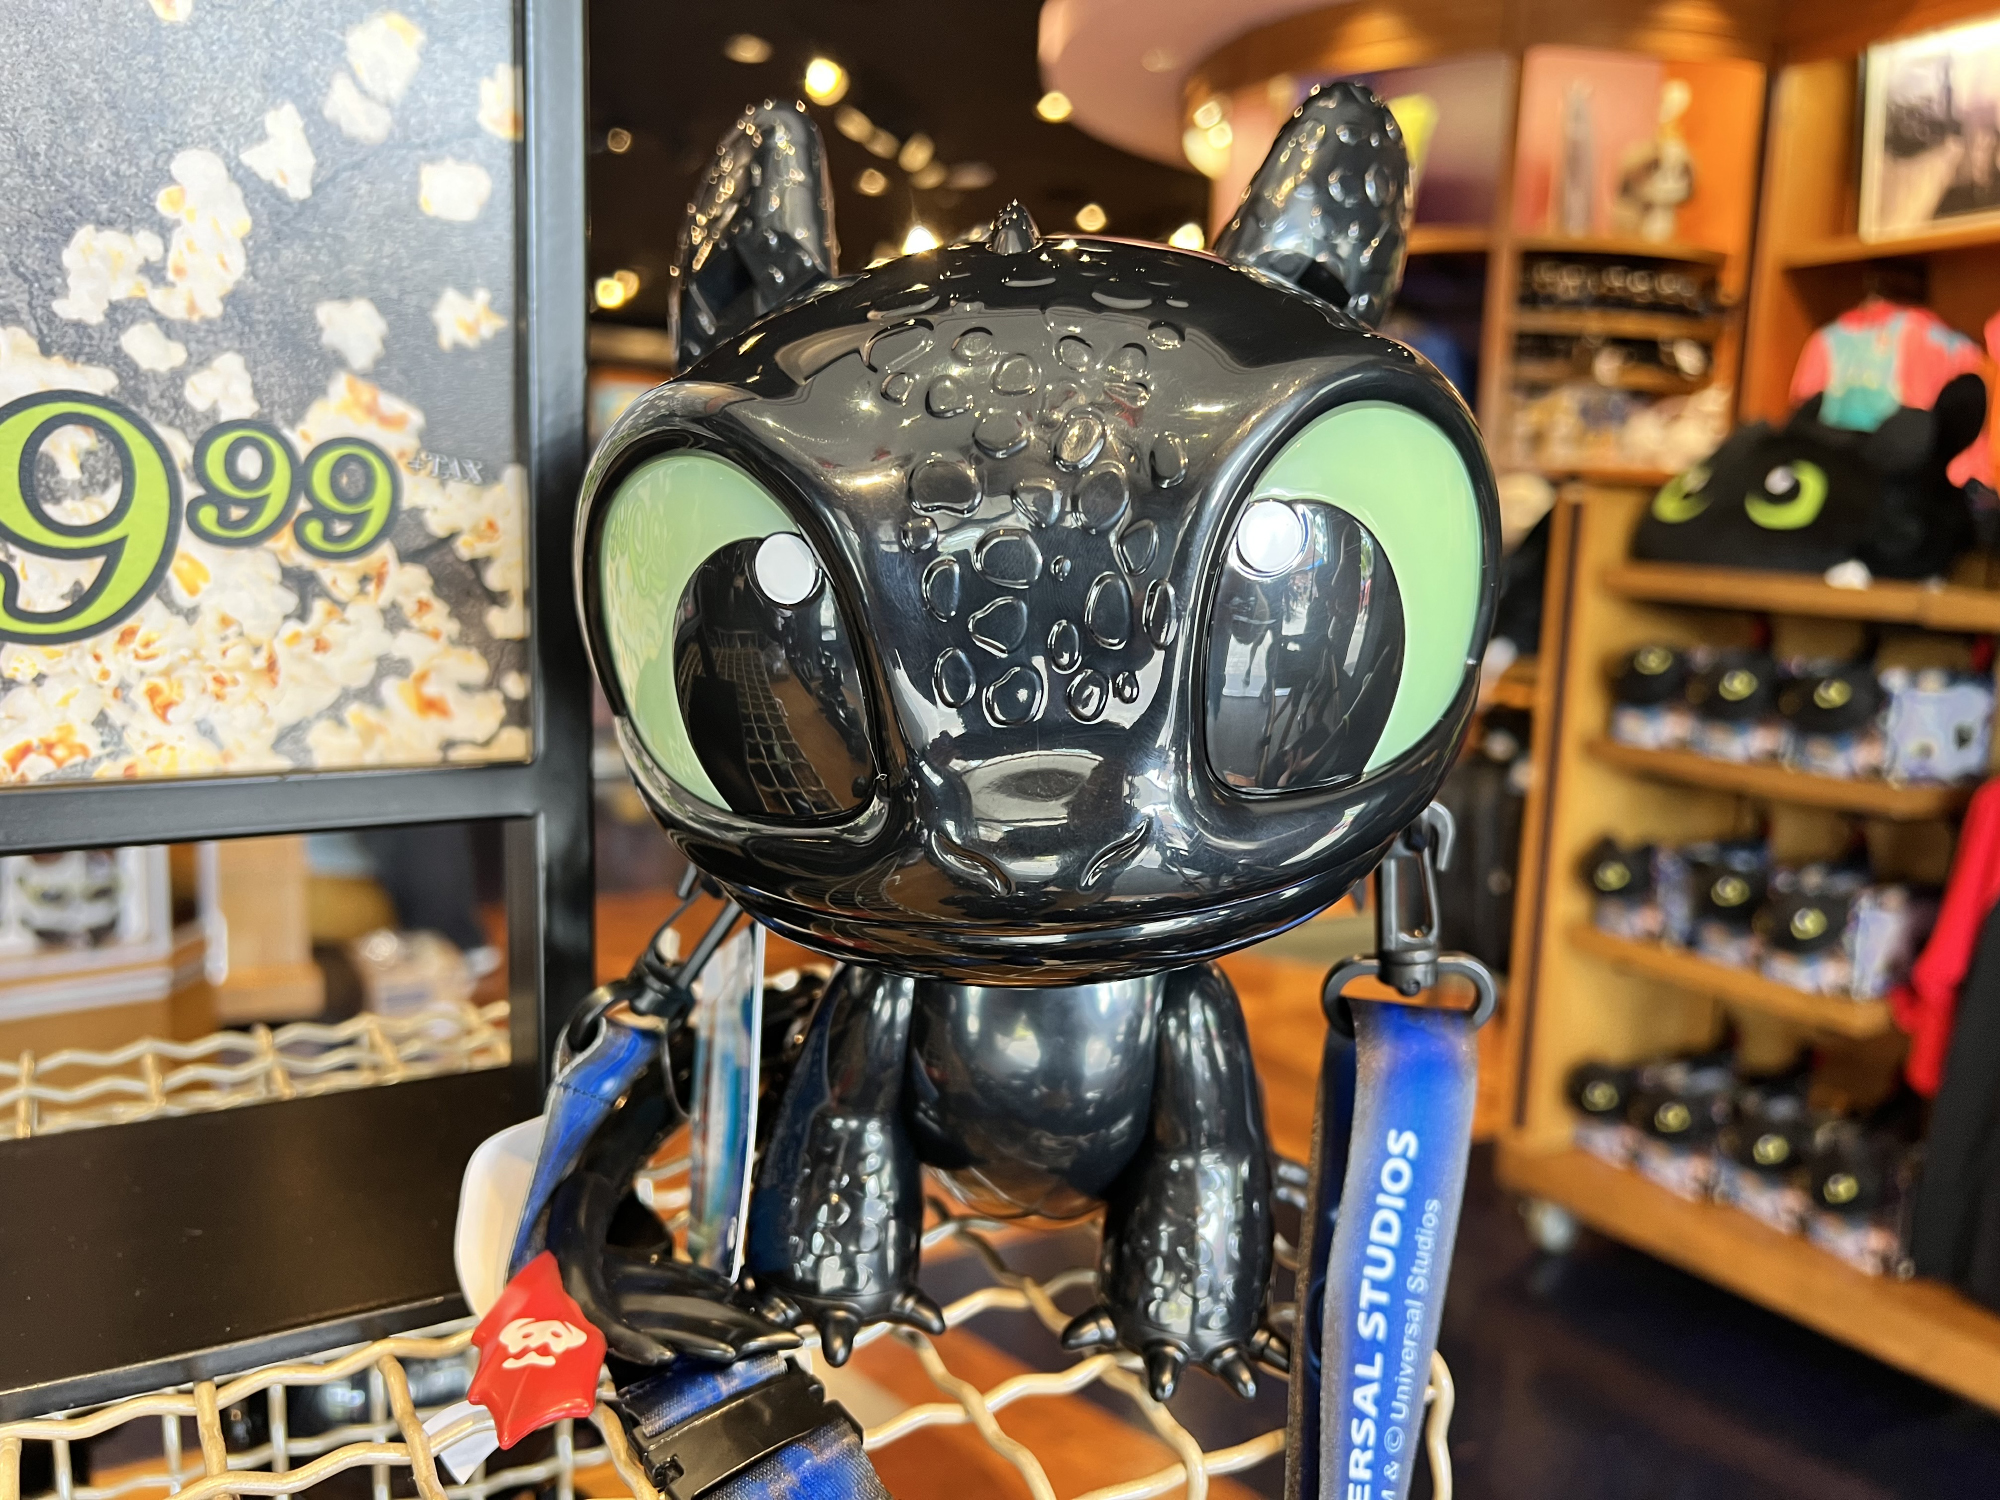 New Toothless Popcorn Bucket arrives at Universal Parks Inside